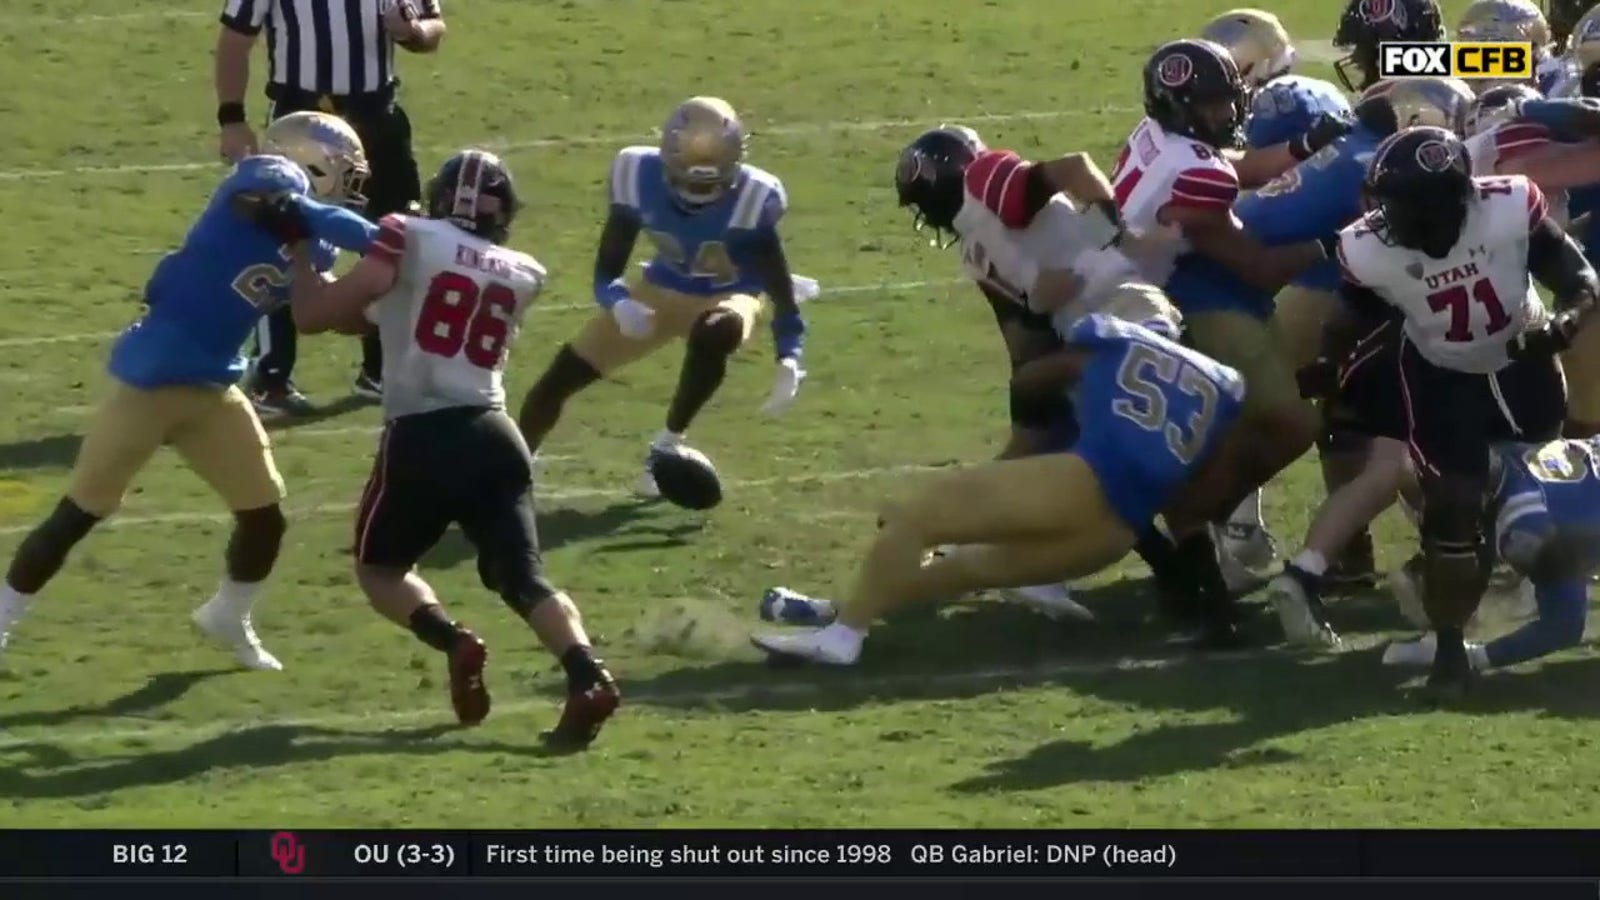 UCLA picked up the loose ball and won 42-25.